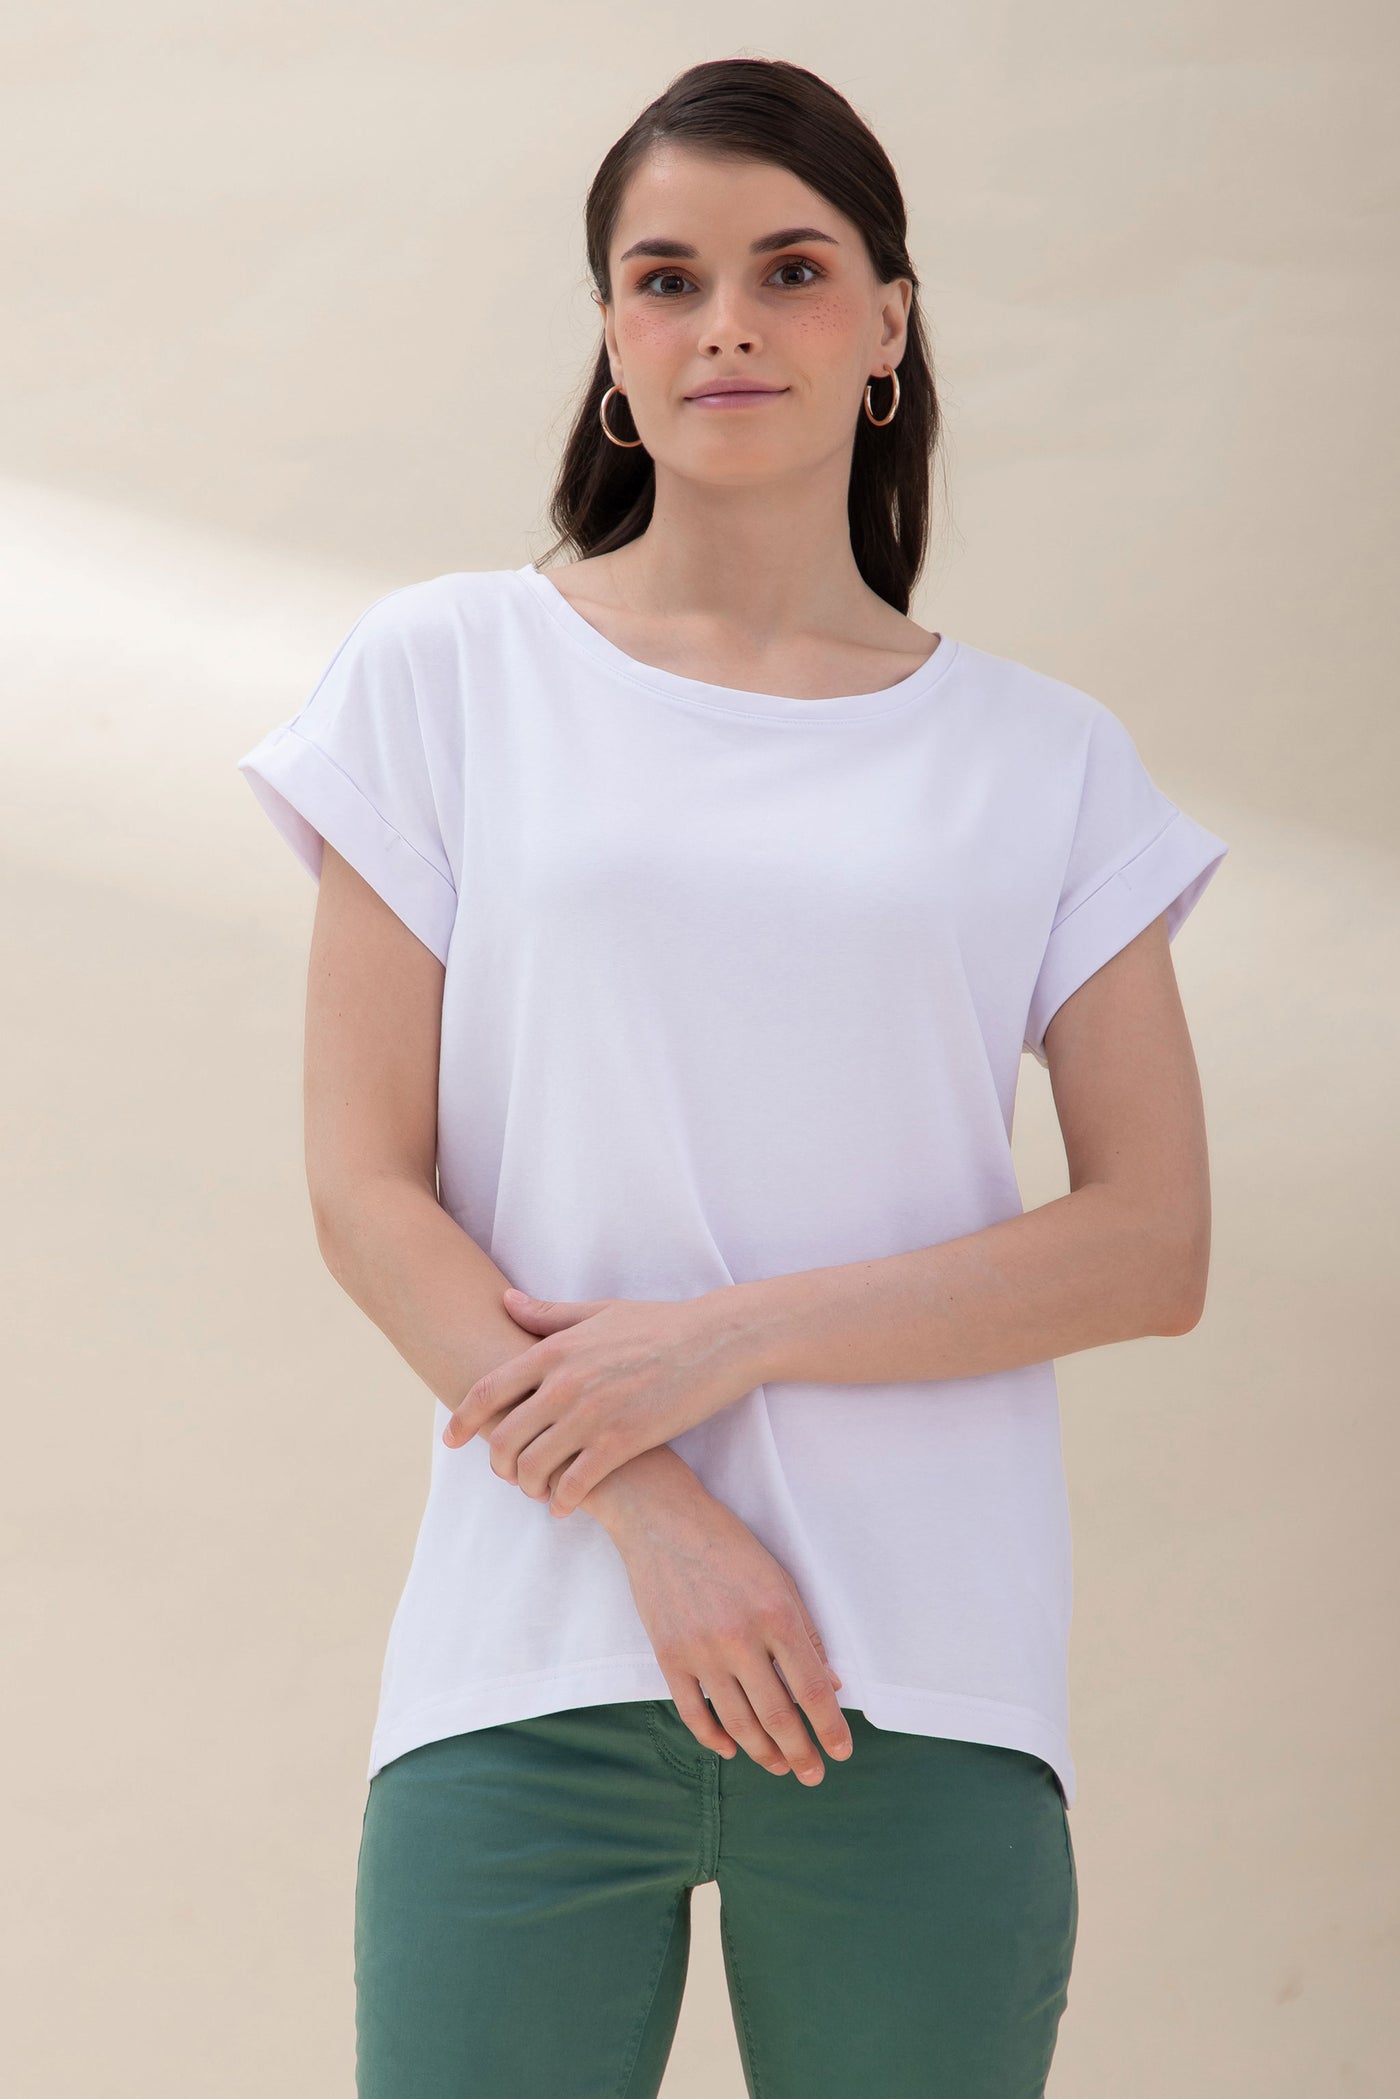 White T-shirt with cap sleeve